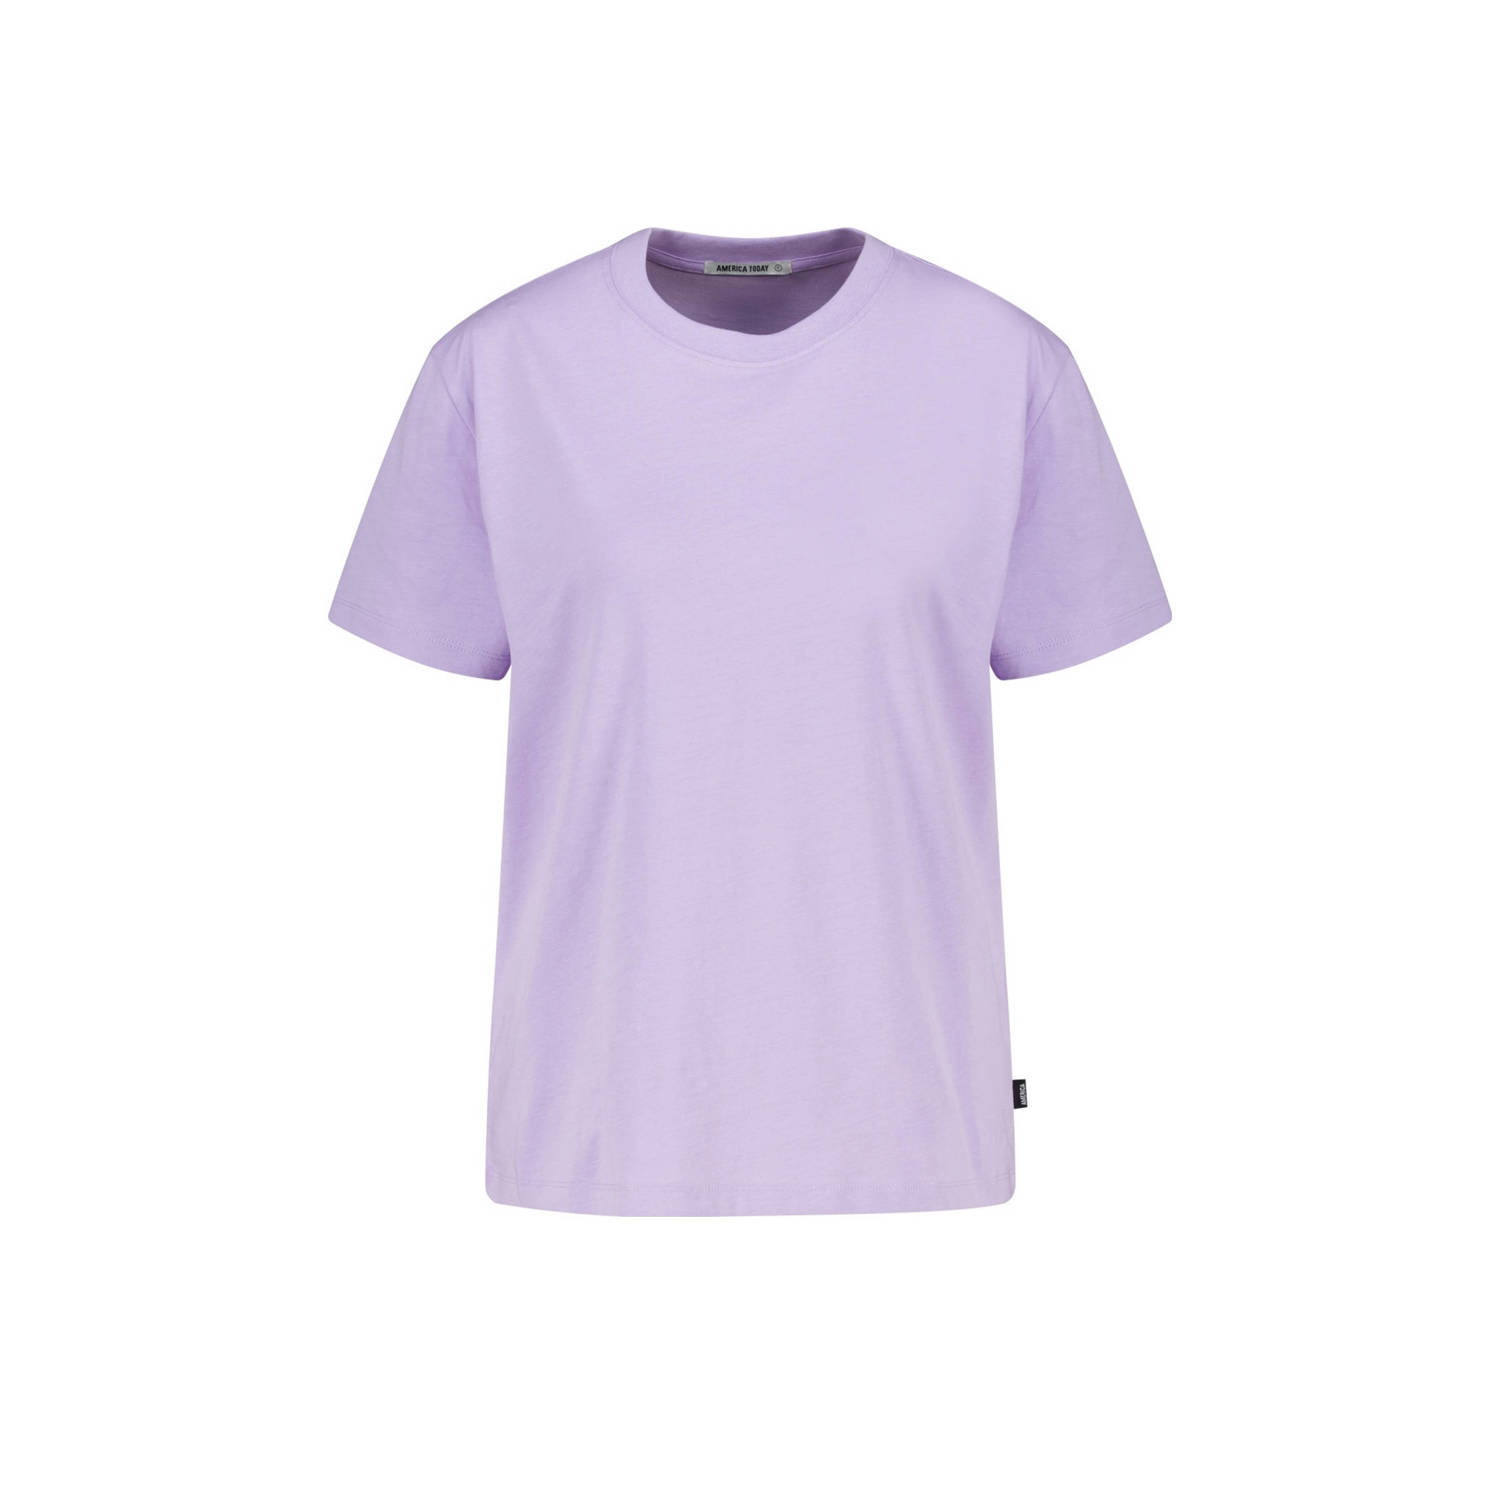 America Today T-shirt Esther lilac purple